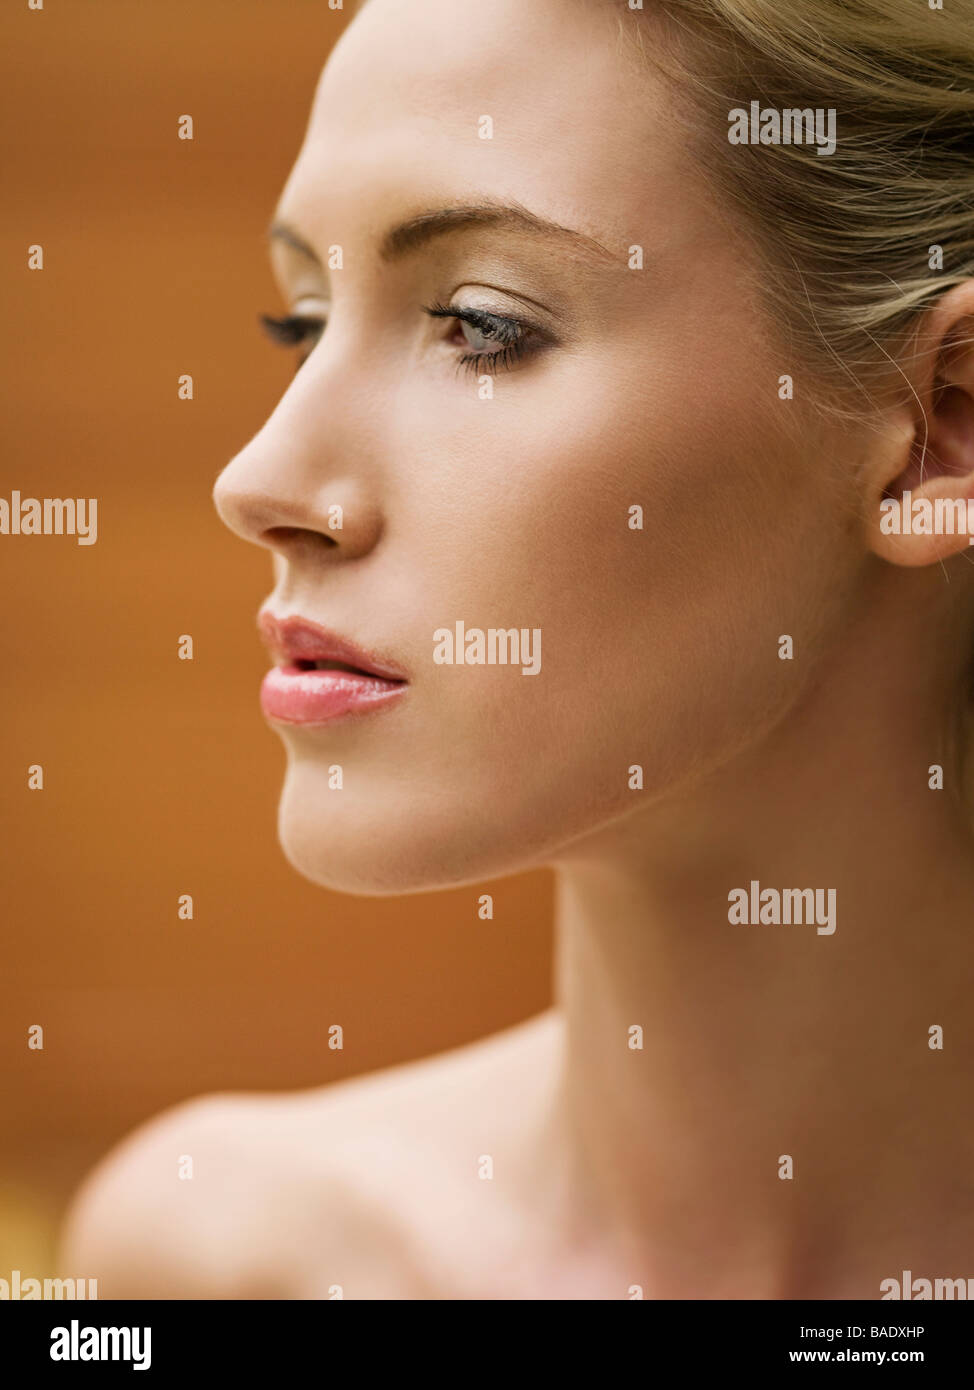 blonde woman's face in profile Stock Photo